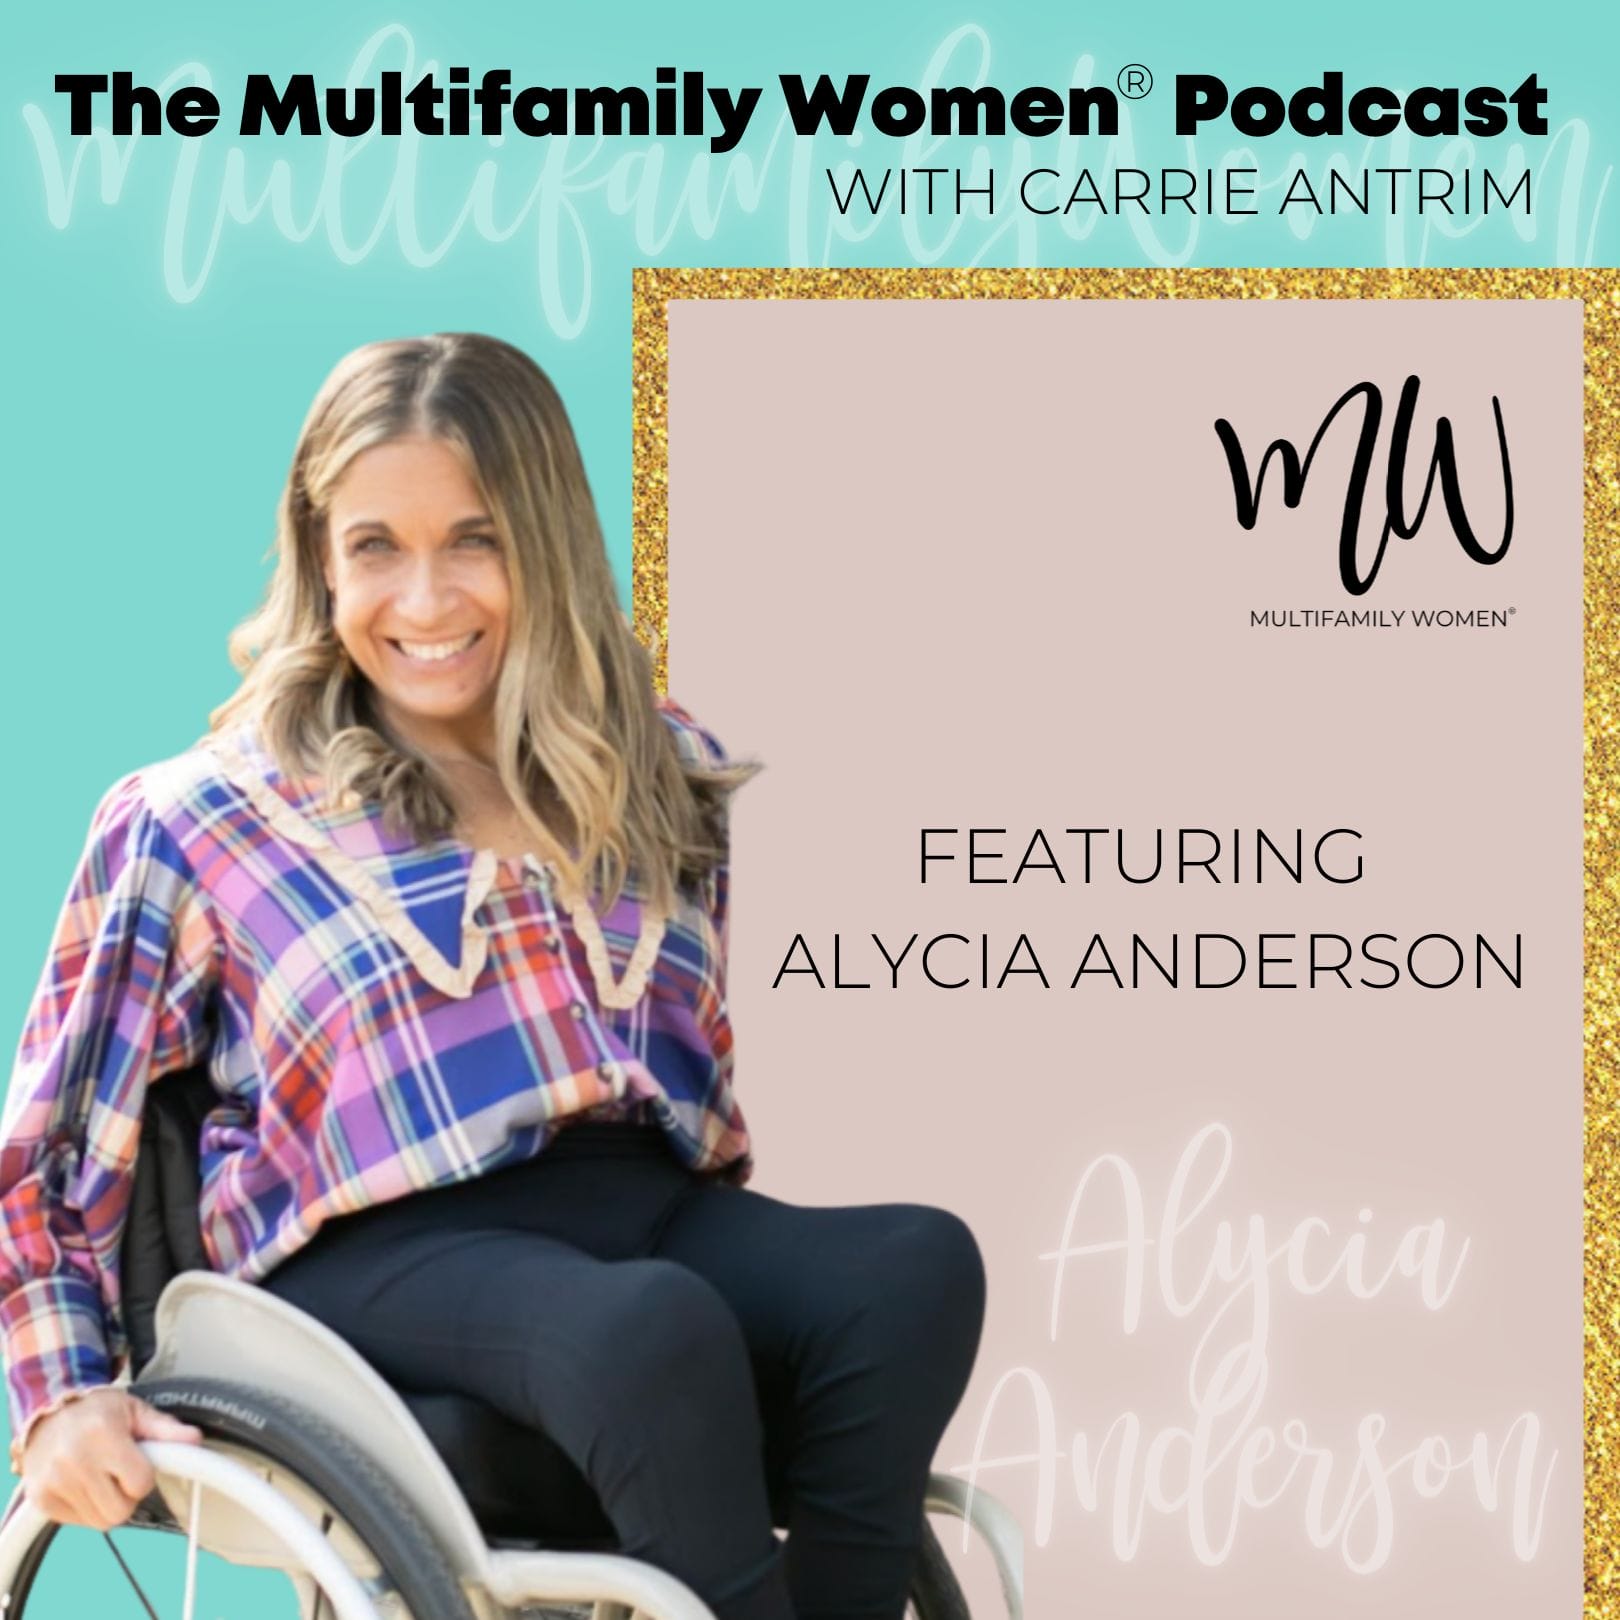 alycia on the multifamily women podcast marketing banner